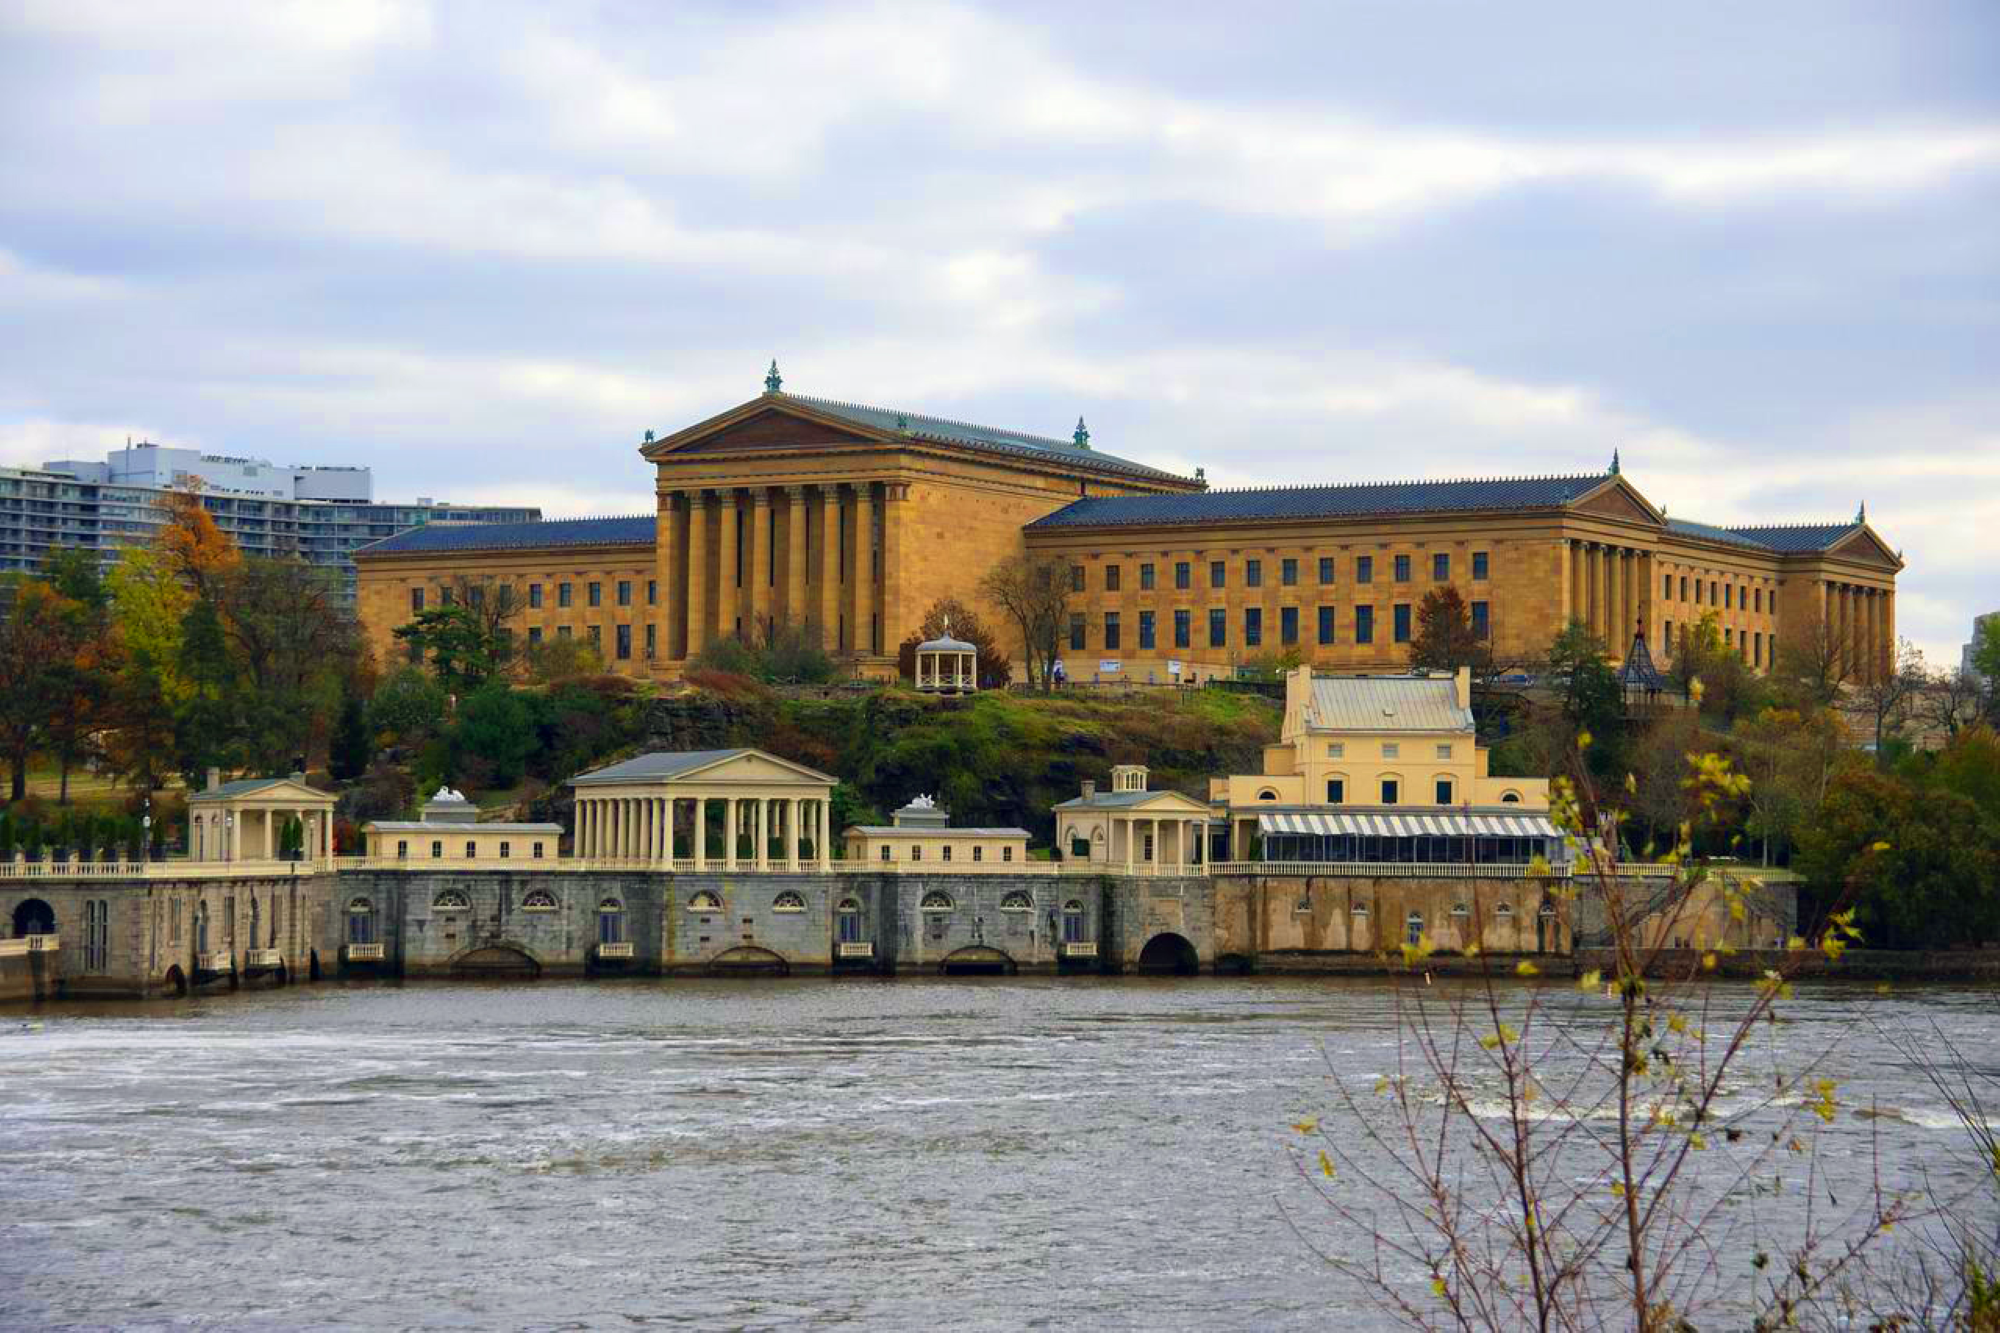 A view of the Philadelphia Museum of Art, a long building of orange brick and blue angled roofs. The Schuylkill River flows in the foreground.